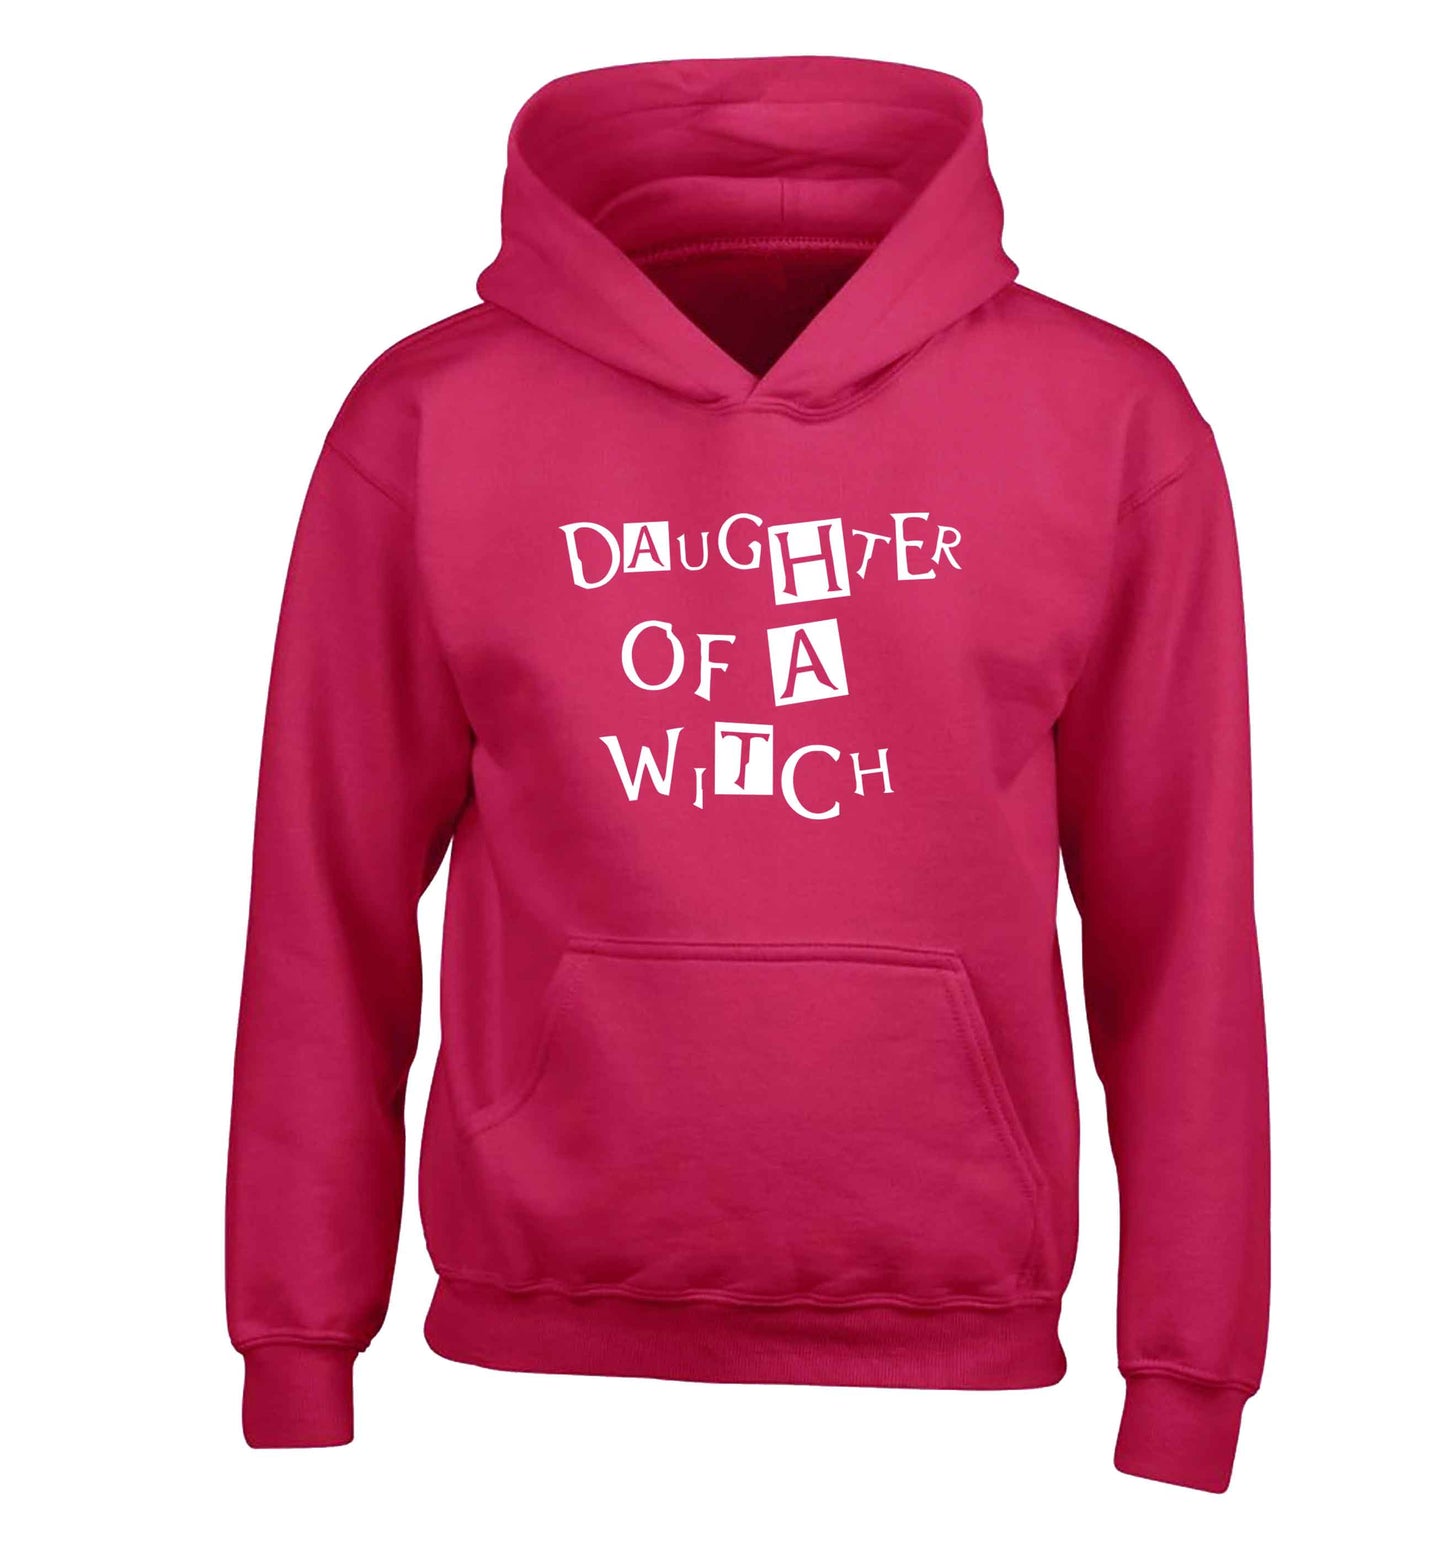 Daughter of a witch children's pink hoodie 12-13 Years